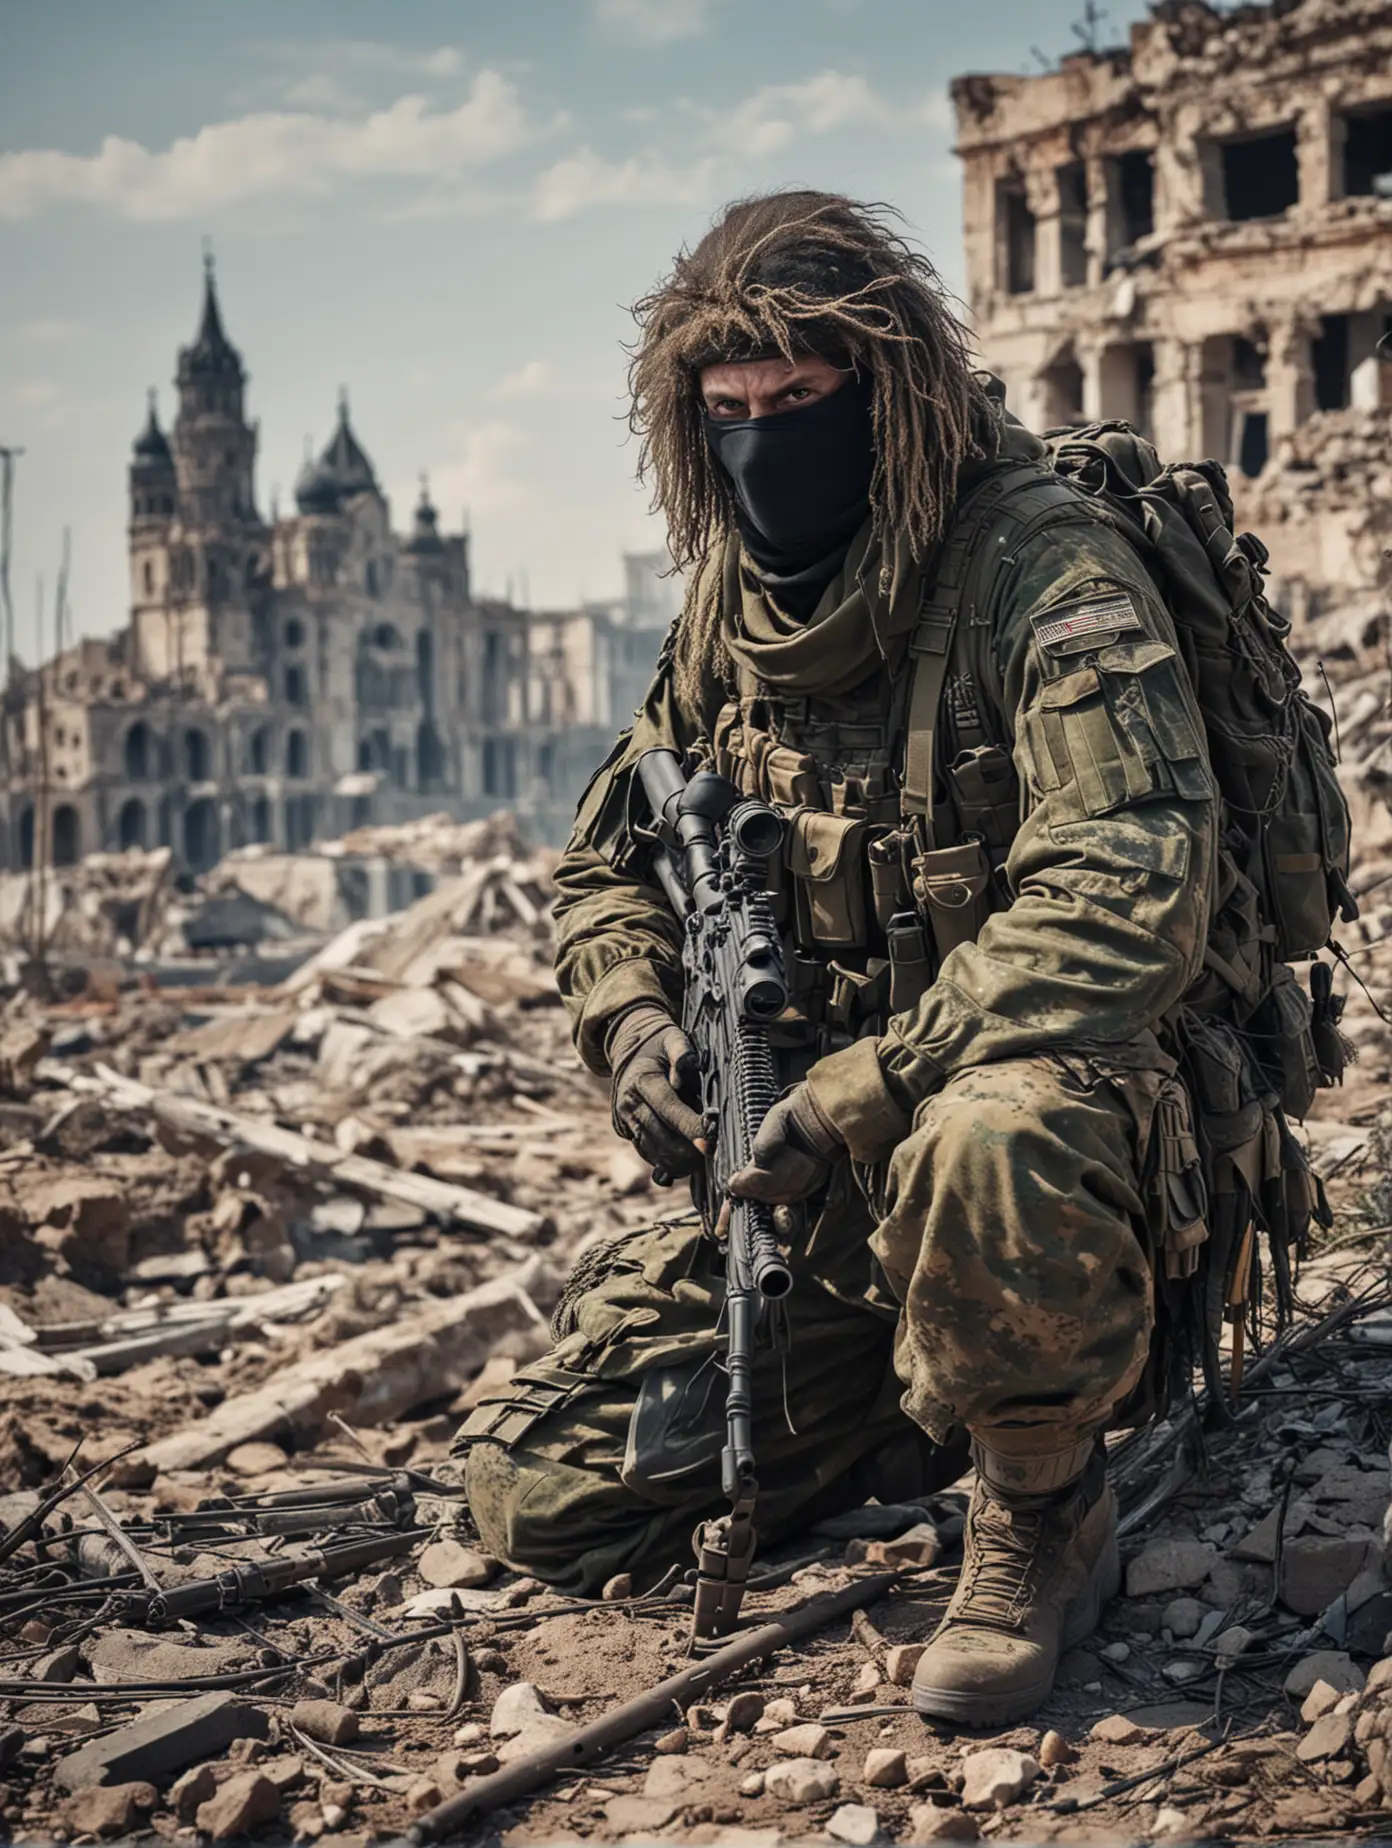 Russian-Sniper-in-Ghillie-Suit-Amid-Ruined-Cityscape